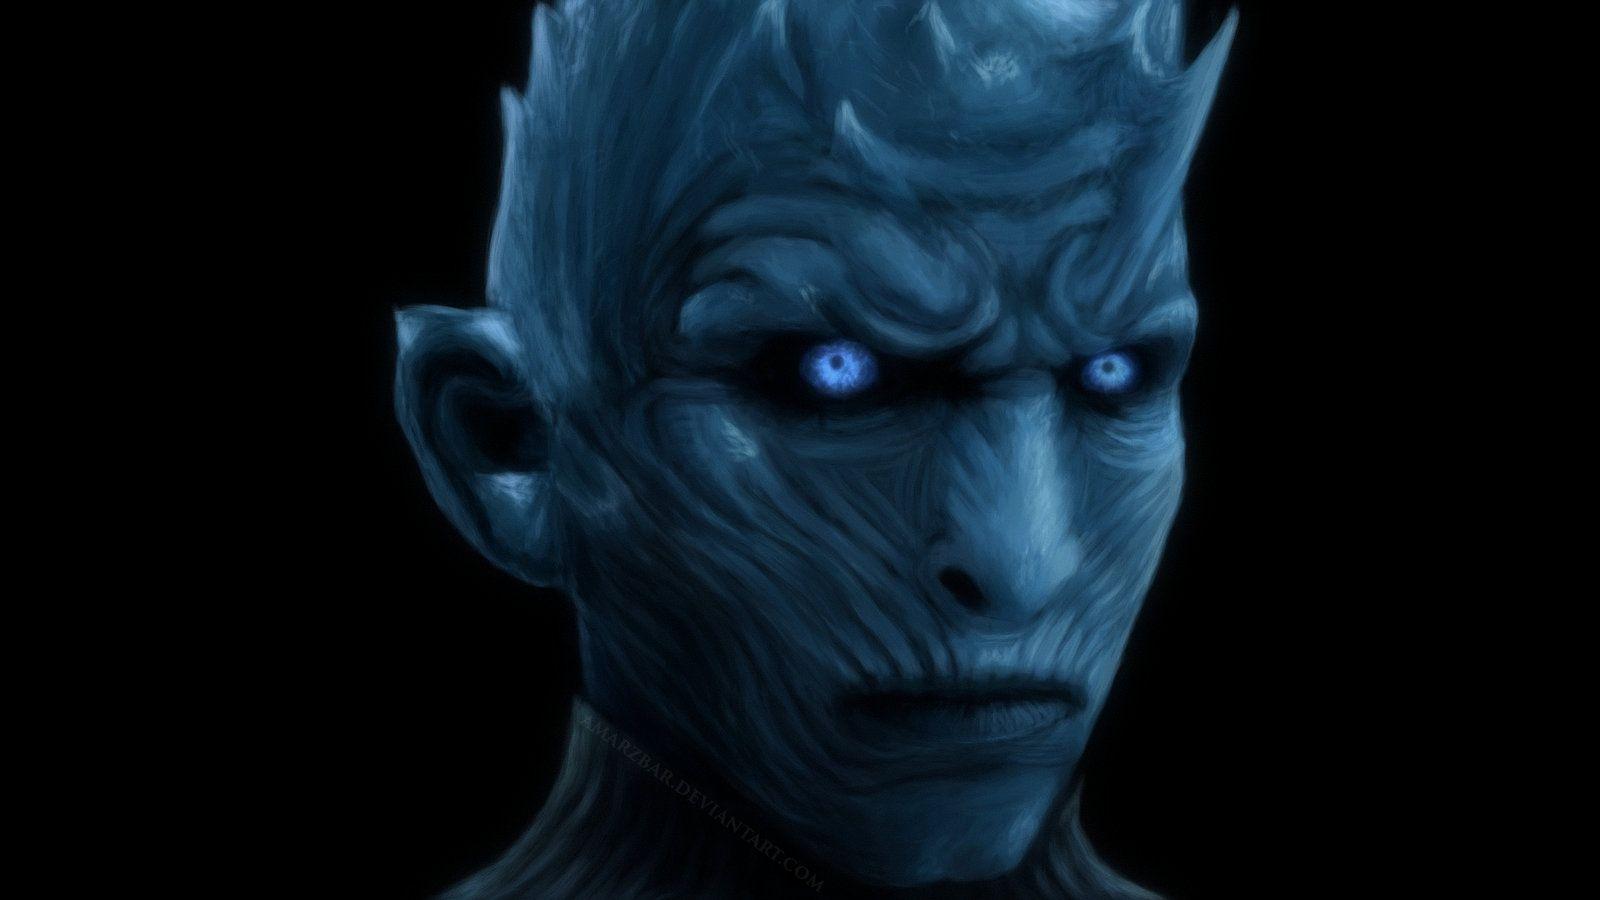 The Night's King